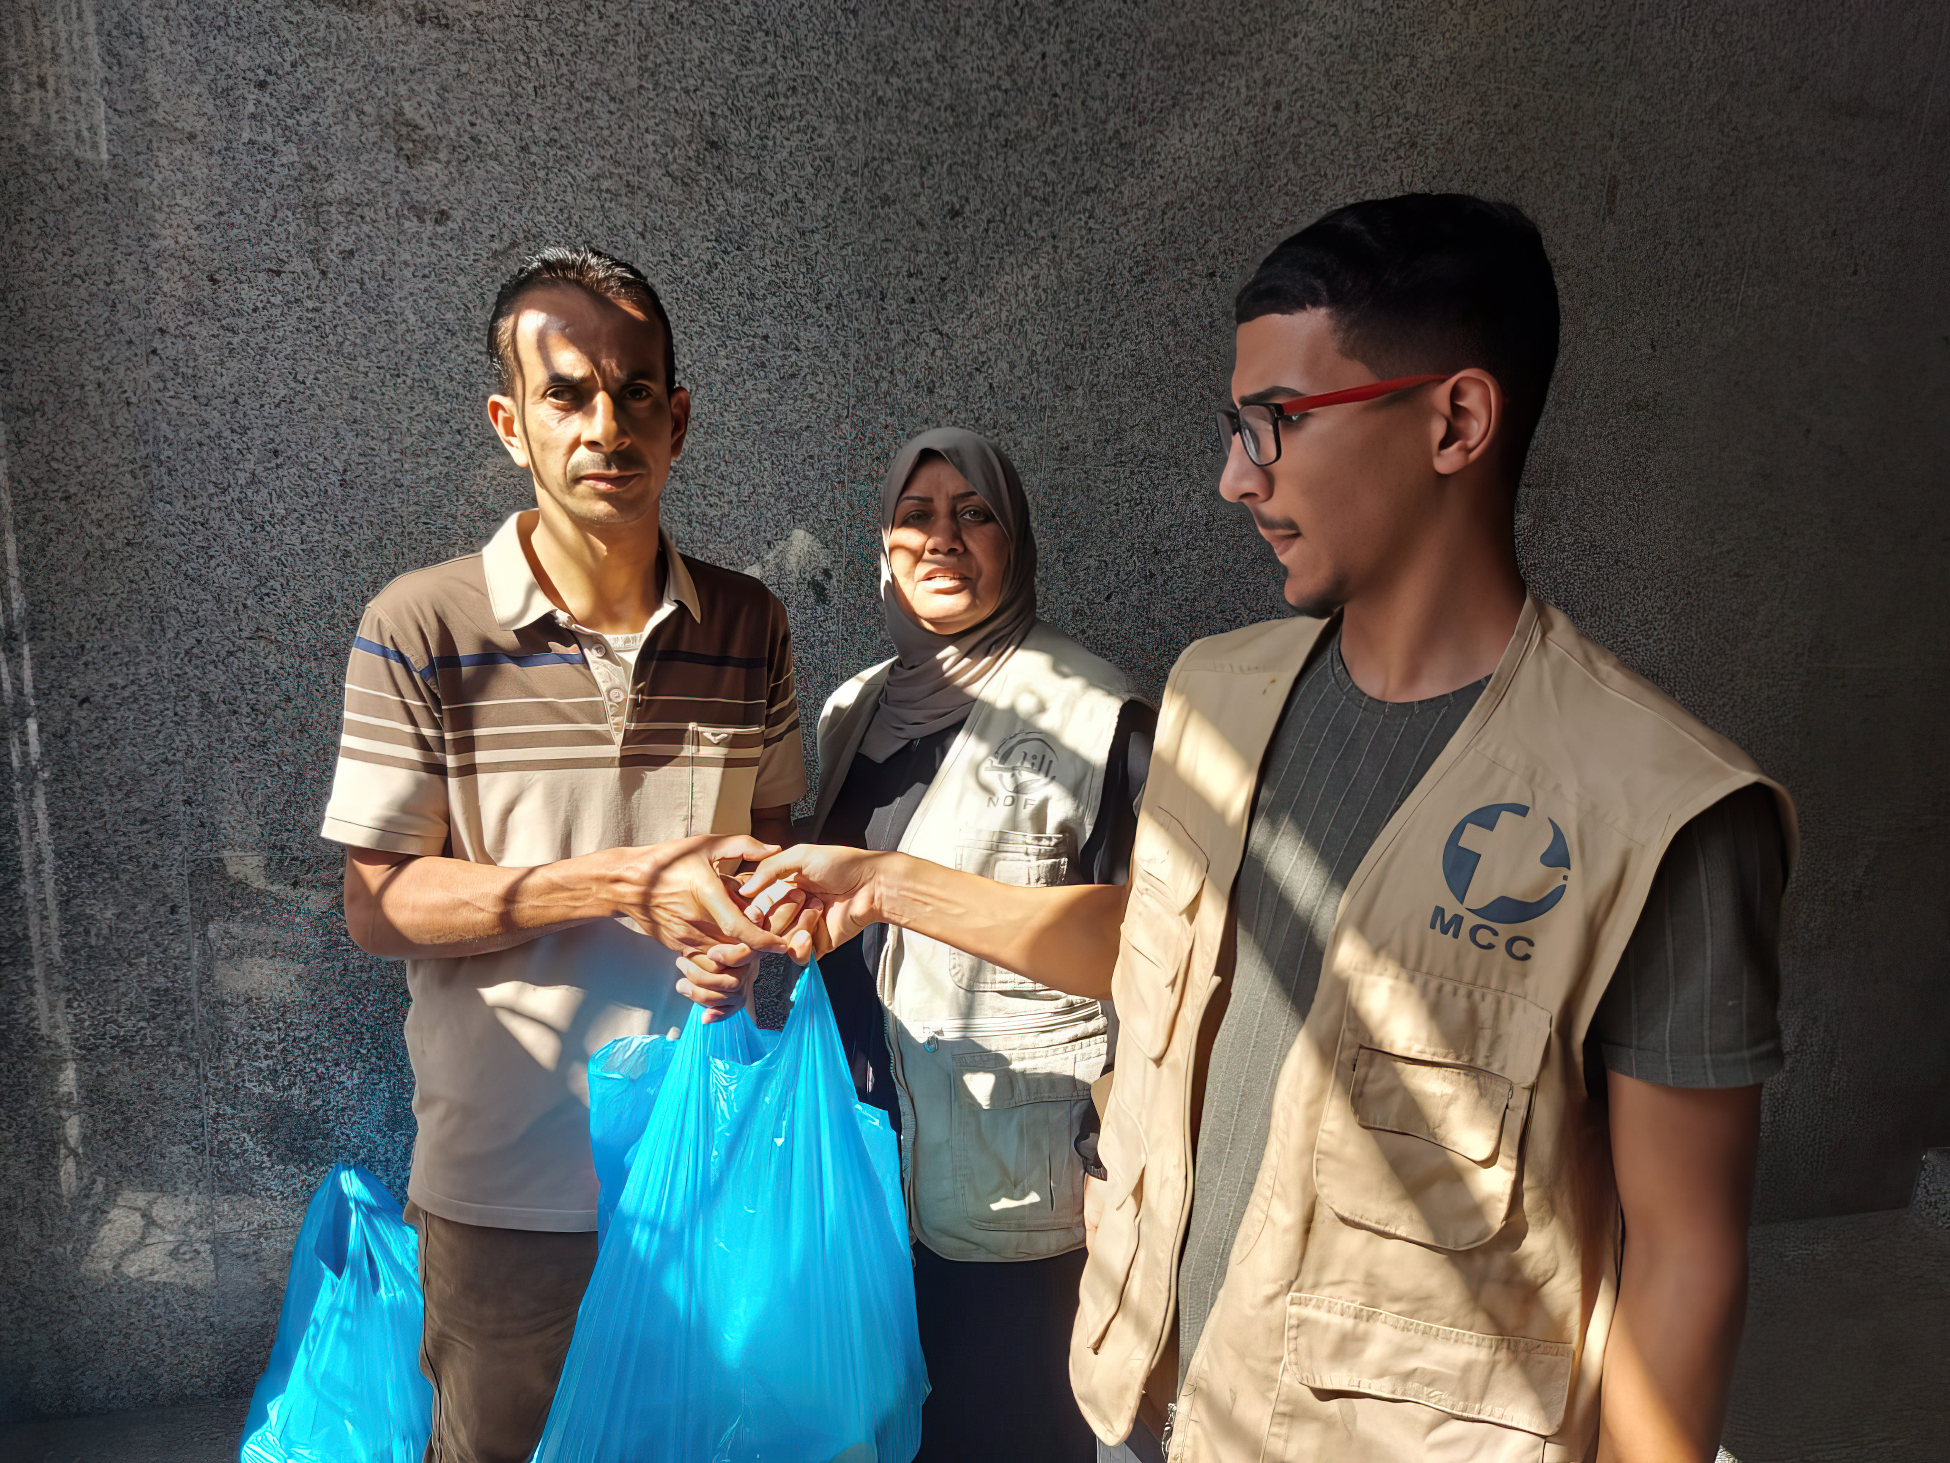 A man and woman handing relief supplies to a man in Gaza